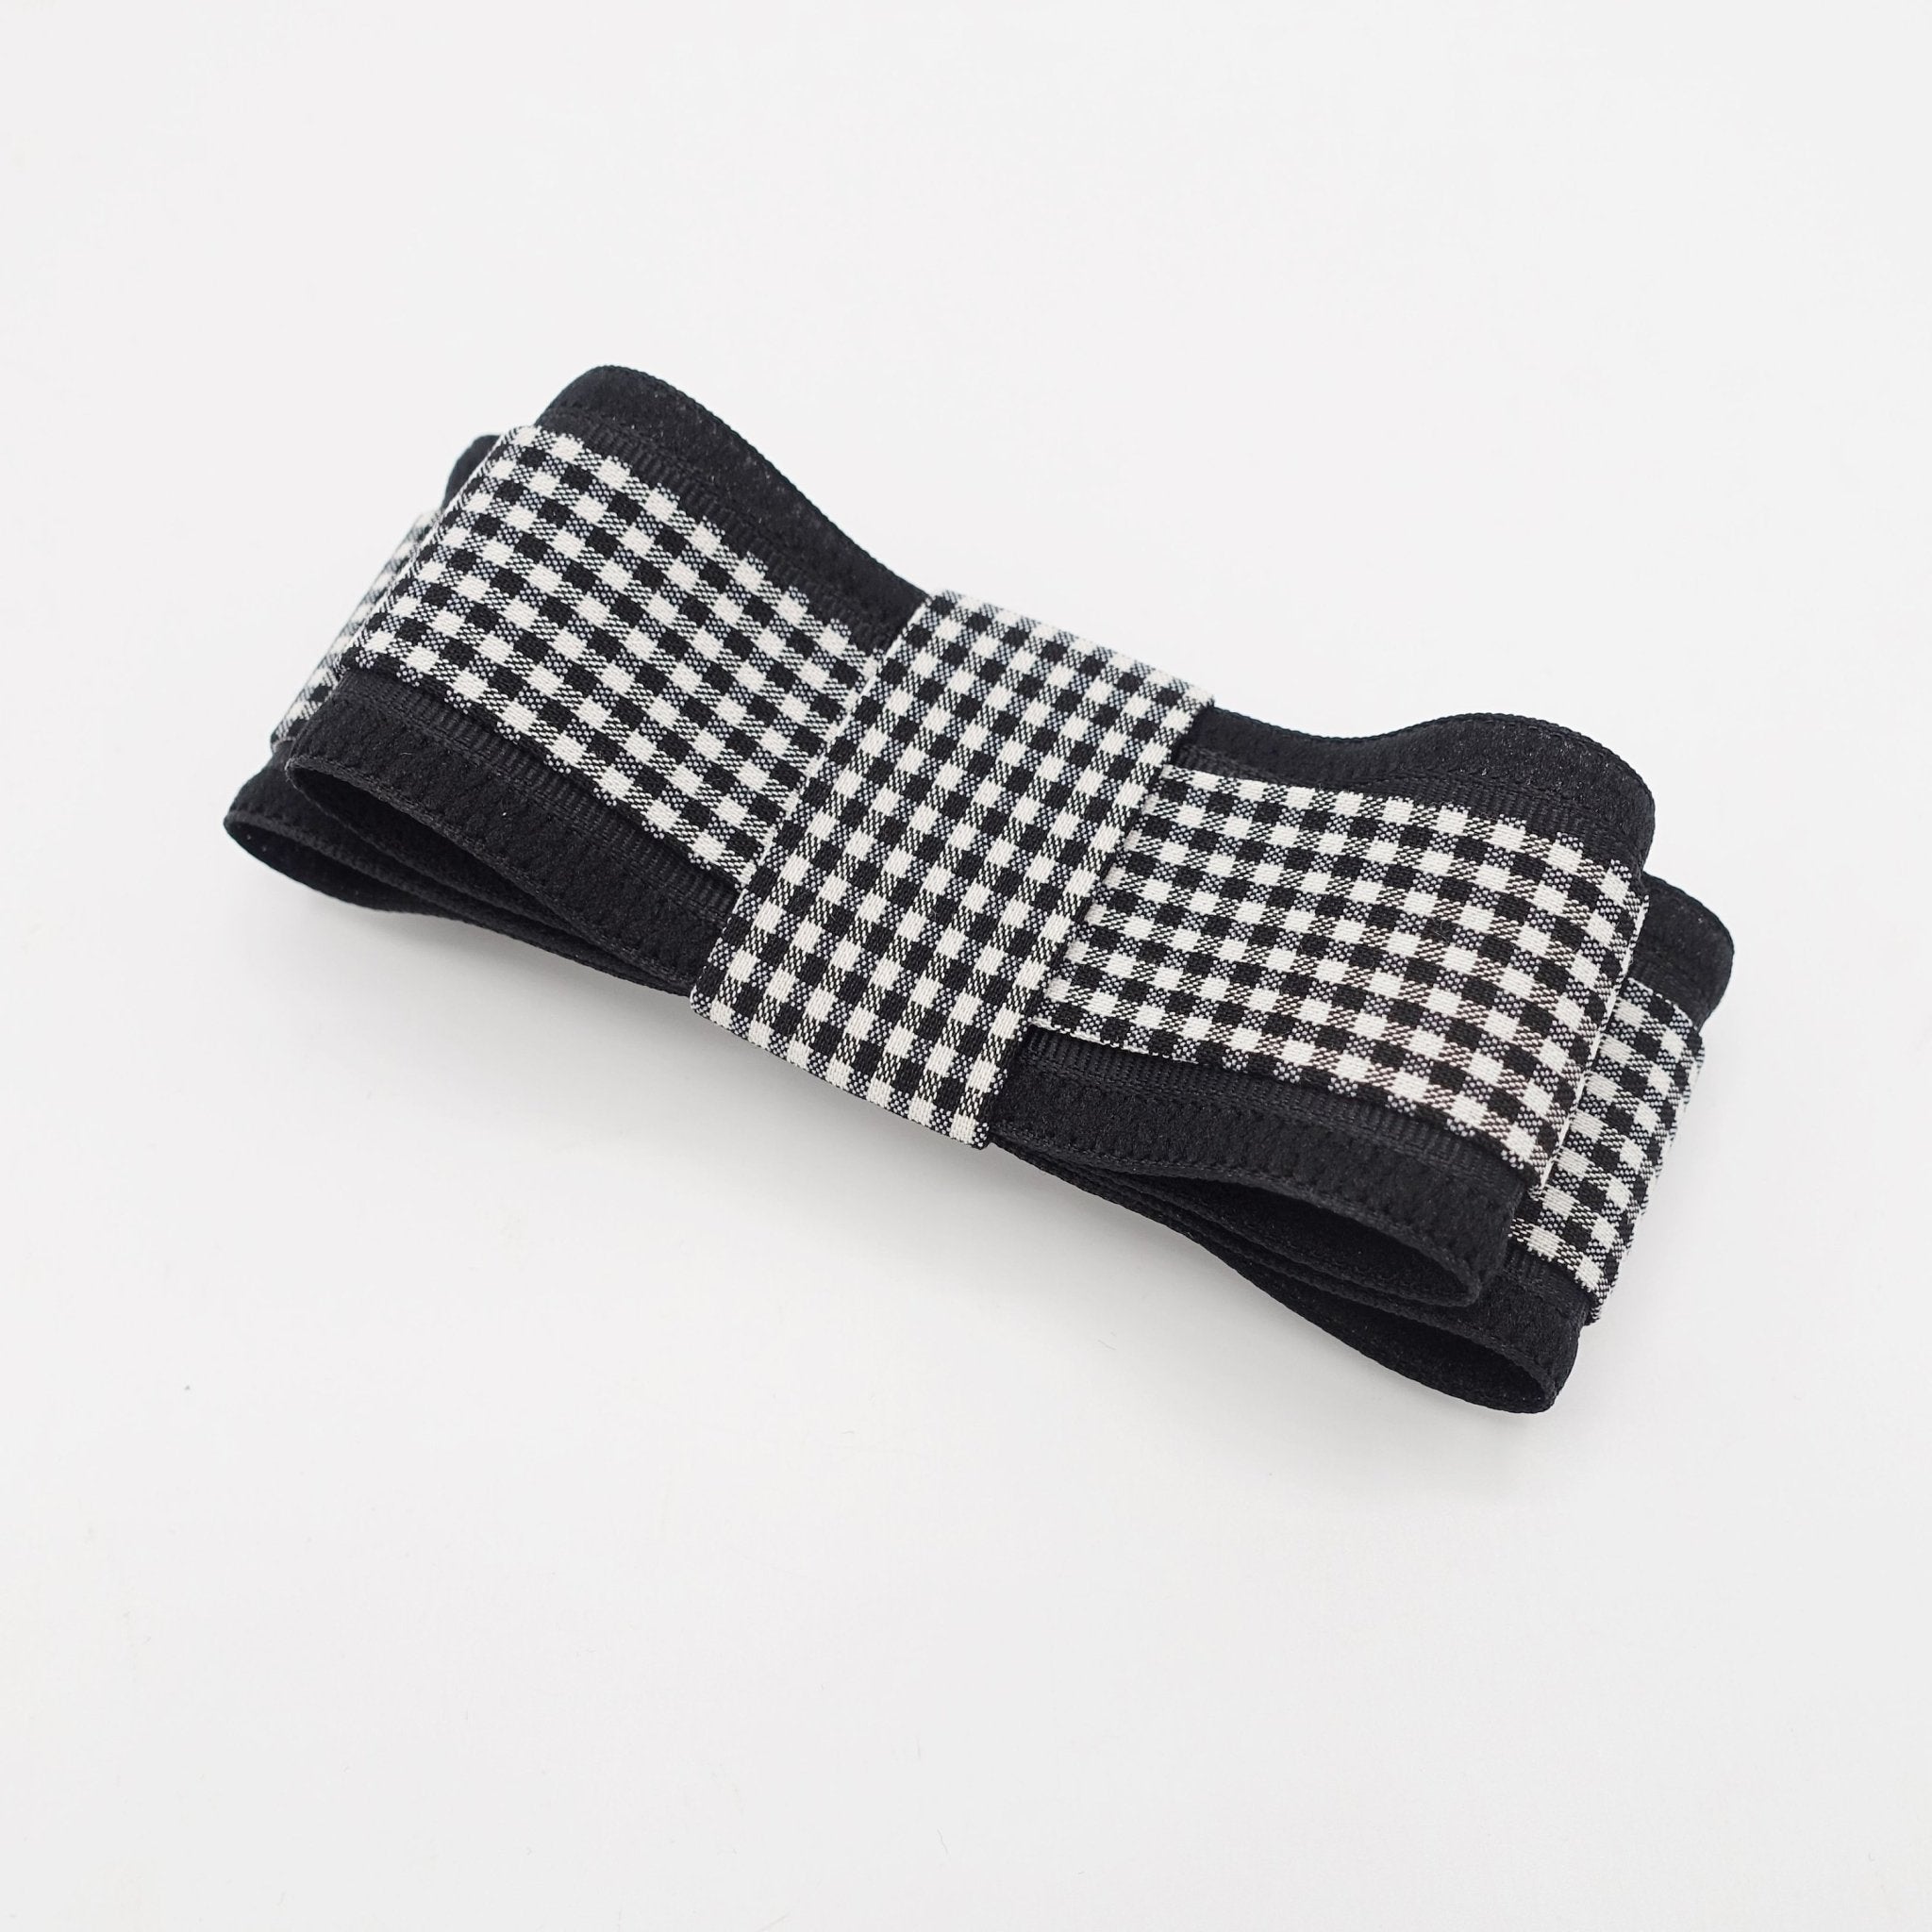 VeryShine claw/banana/barrette gingham small black gingham check bow layered flat bow women hair accessory